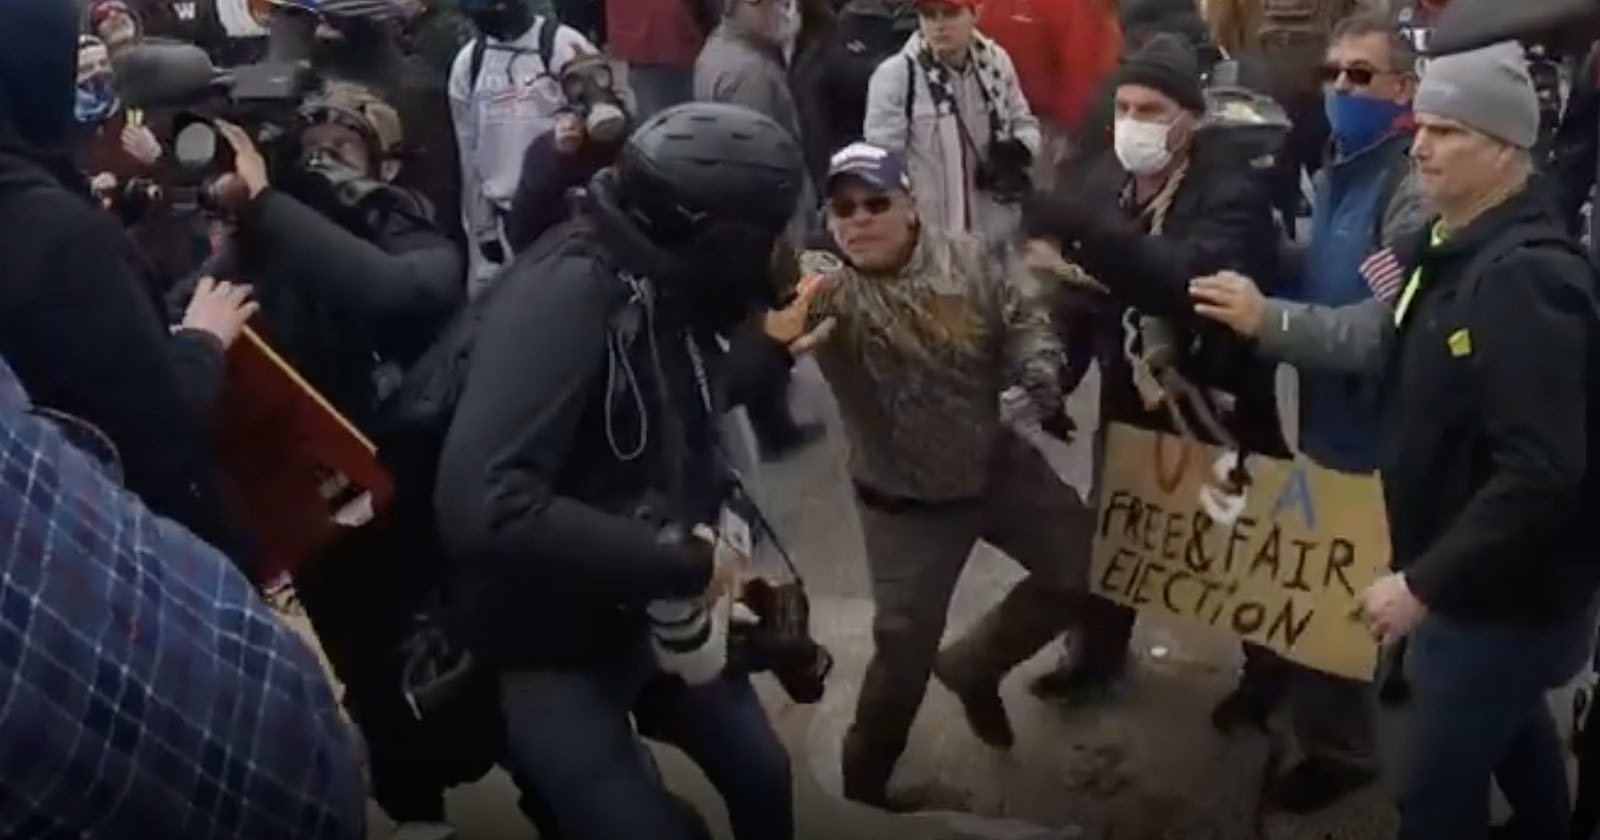 Man Arrested for Assaulting a Photographer at the January 6 Capitol Riot